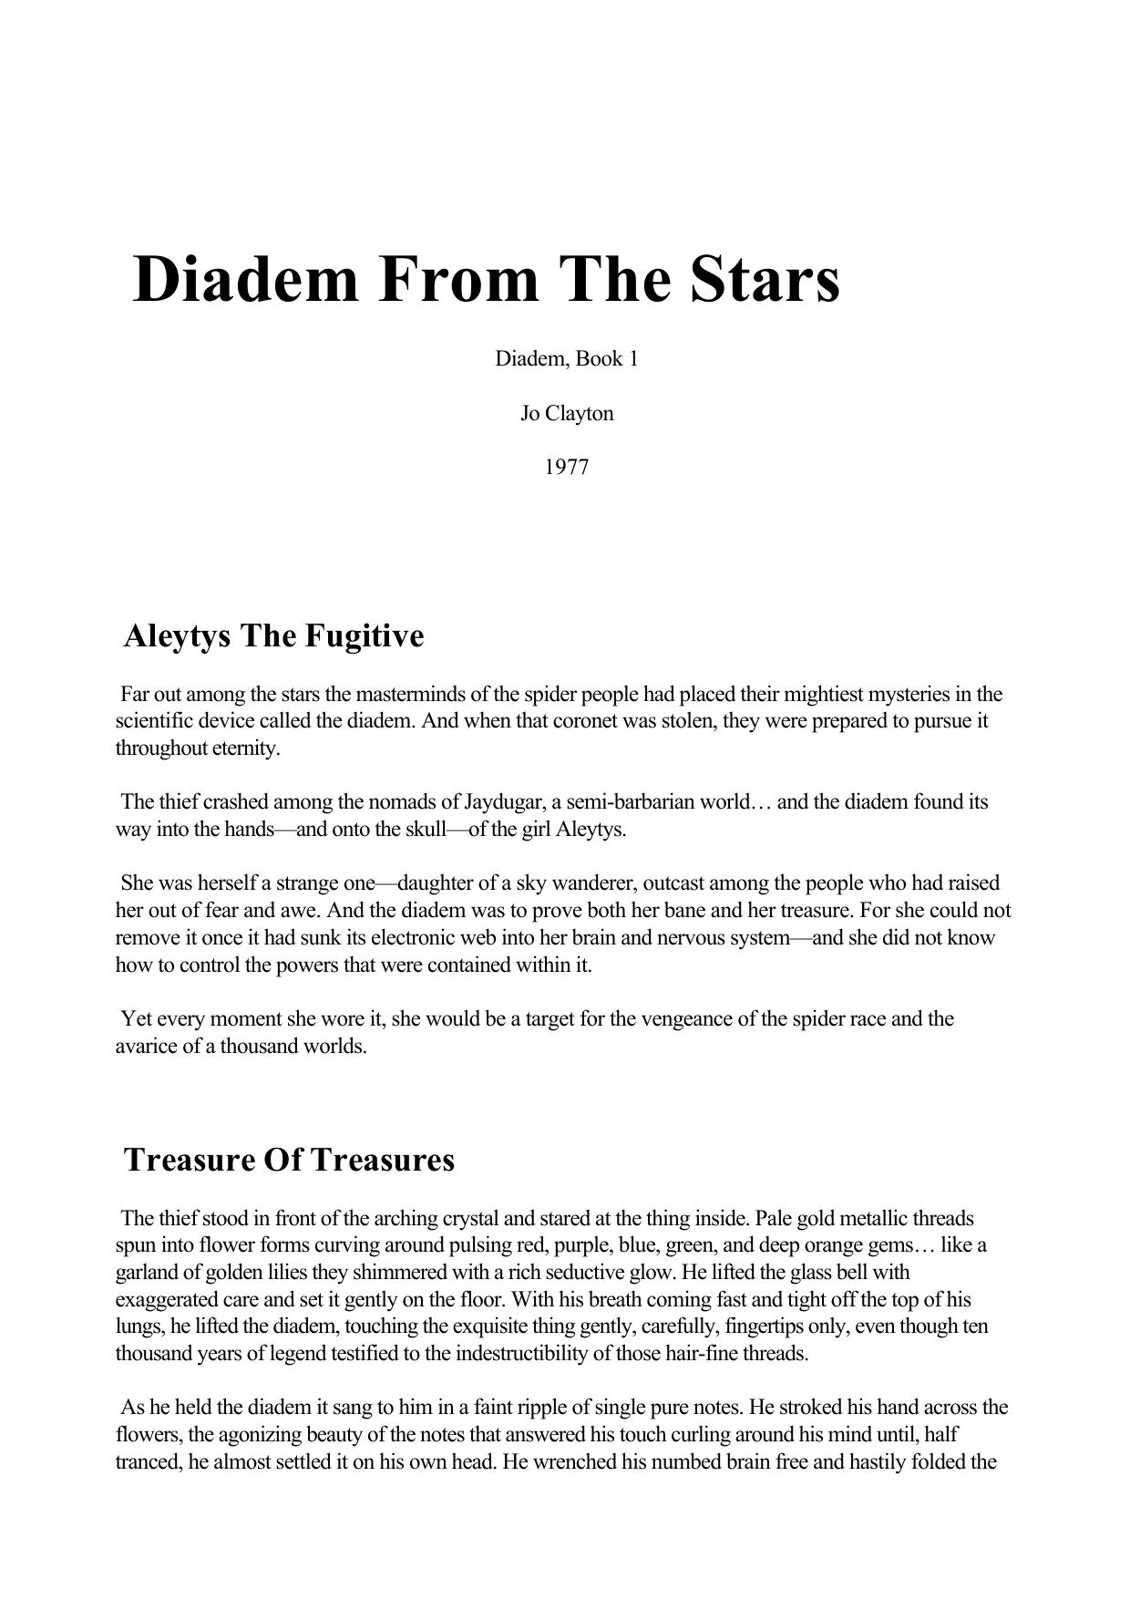 Diadem From the Stars